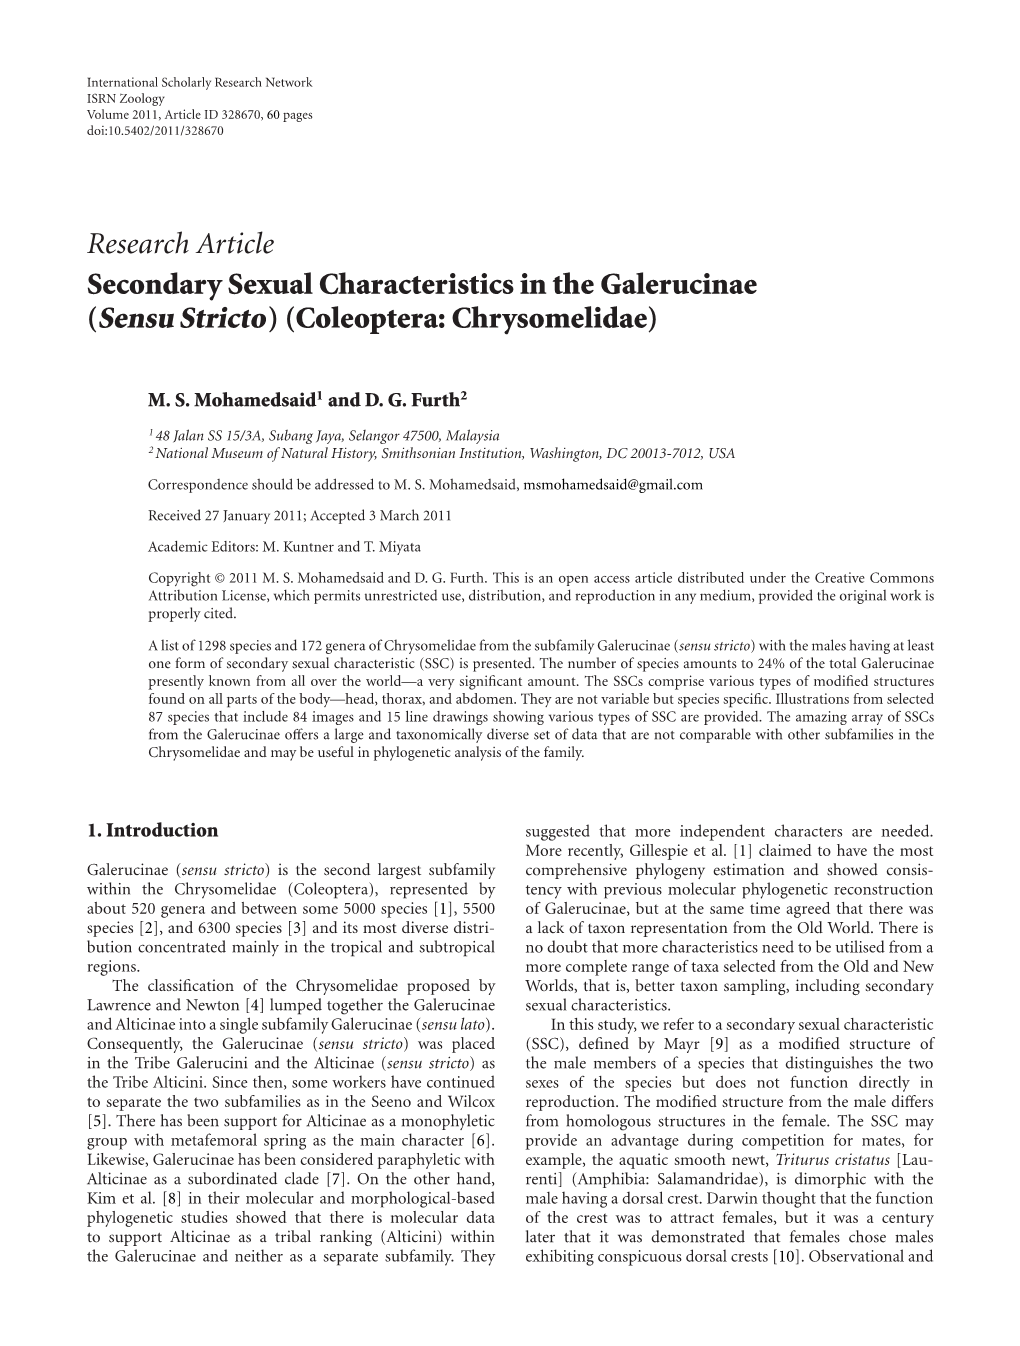 Secondary Sexual Characteristics in the Galerucinae (Sensu Stricto)(Coleoptera: Chrysomelidae)